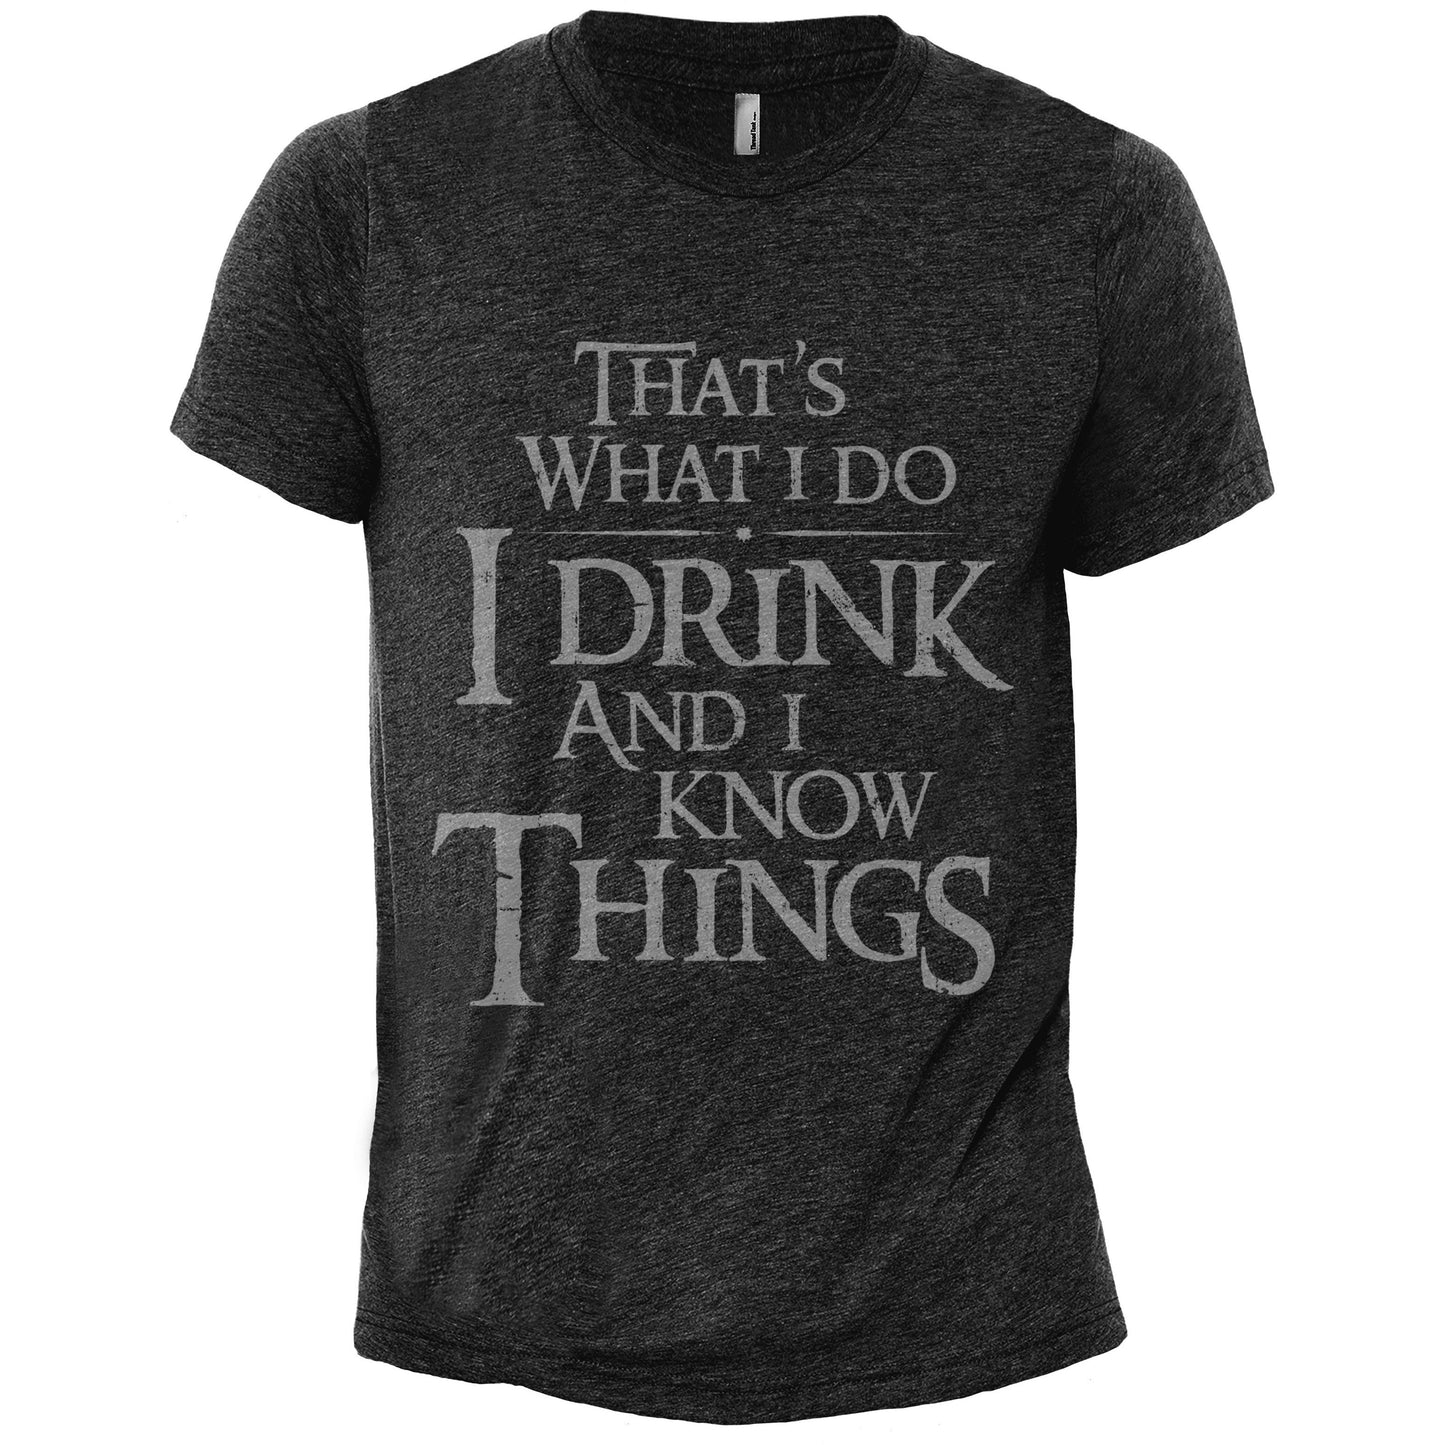 Thats What I Do I Drink And I Know Things Charcoal Printed Graphic Men's Crew T-Shirt Tee